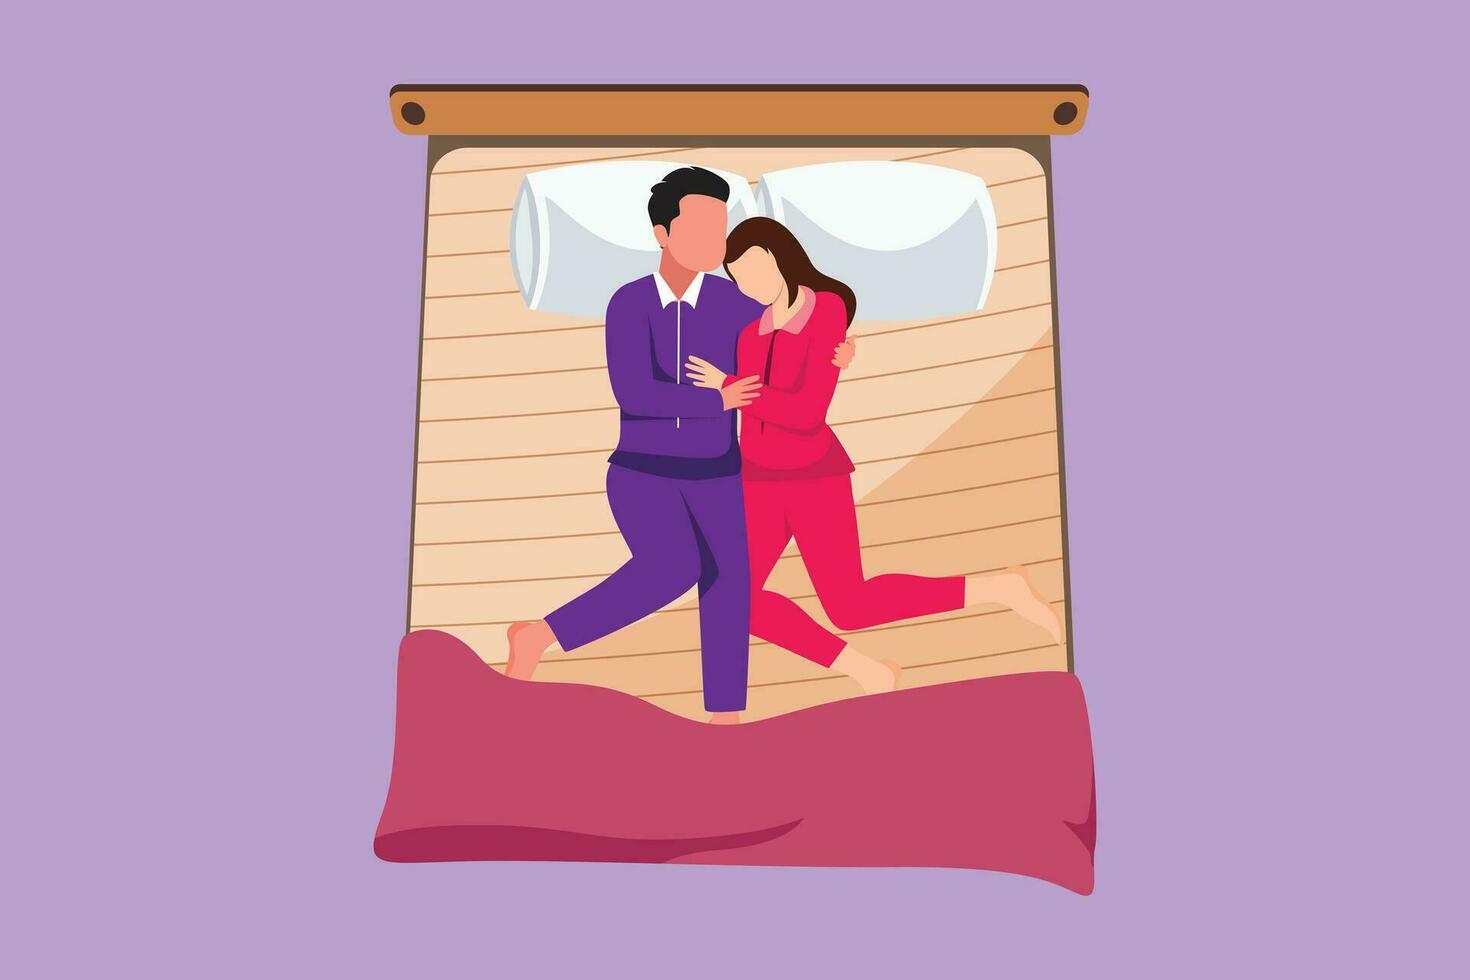 Cartoon flat style drawing male and female couple embracing affectionately in bed, man and woman sleeping on bed while hugging lovingly, cute sleeping pose of lover. Graphic design vector illustration